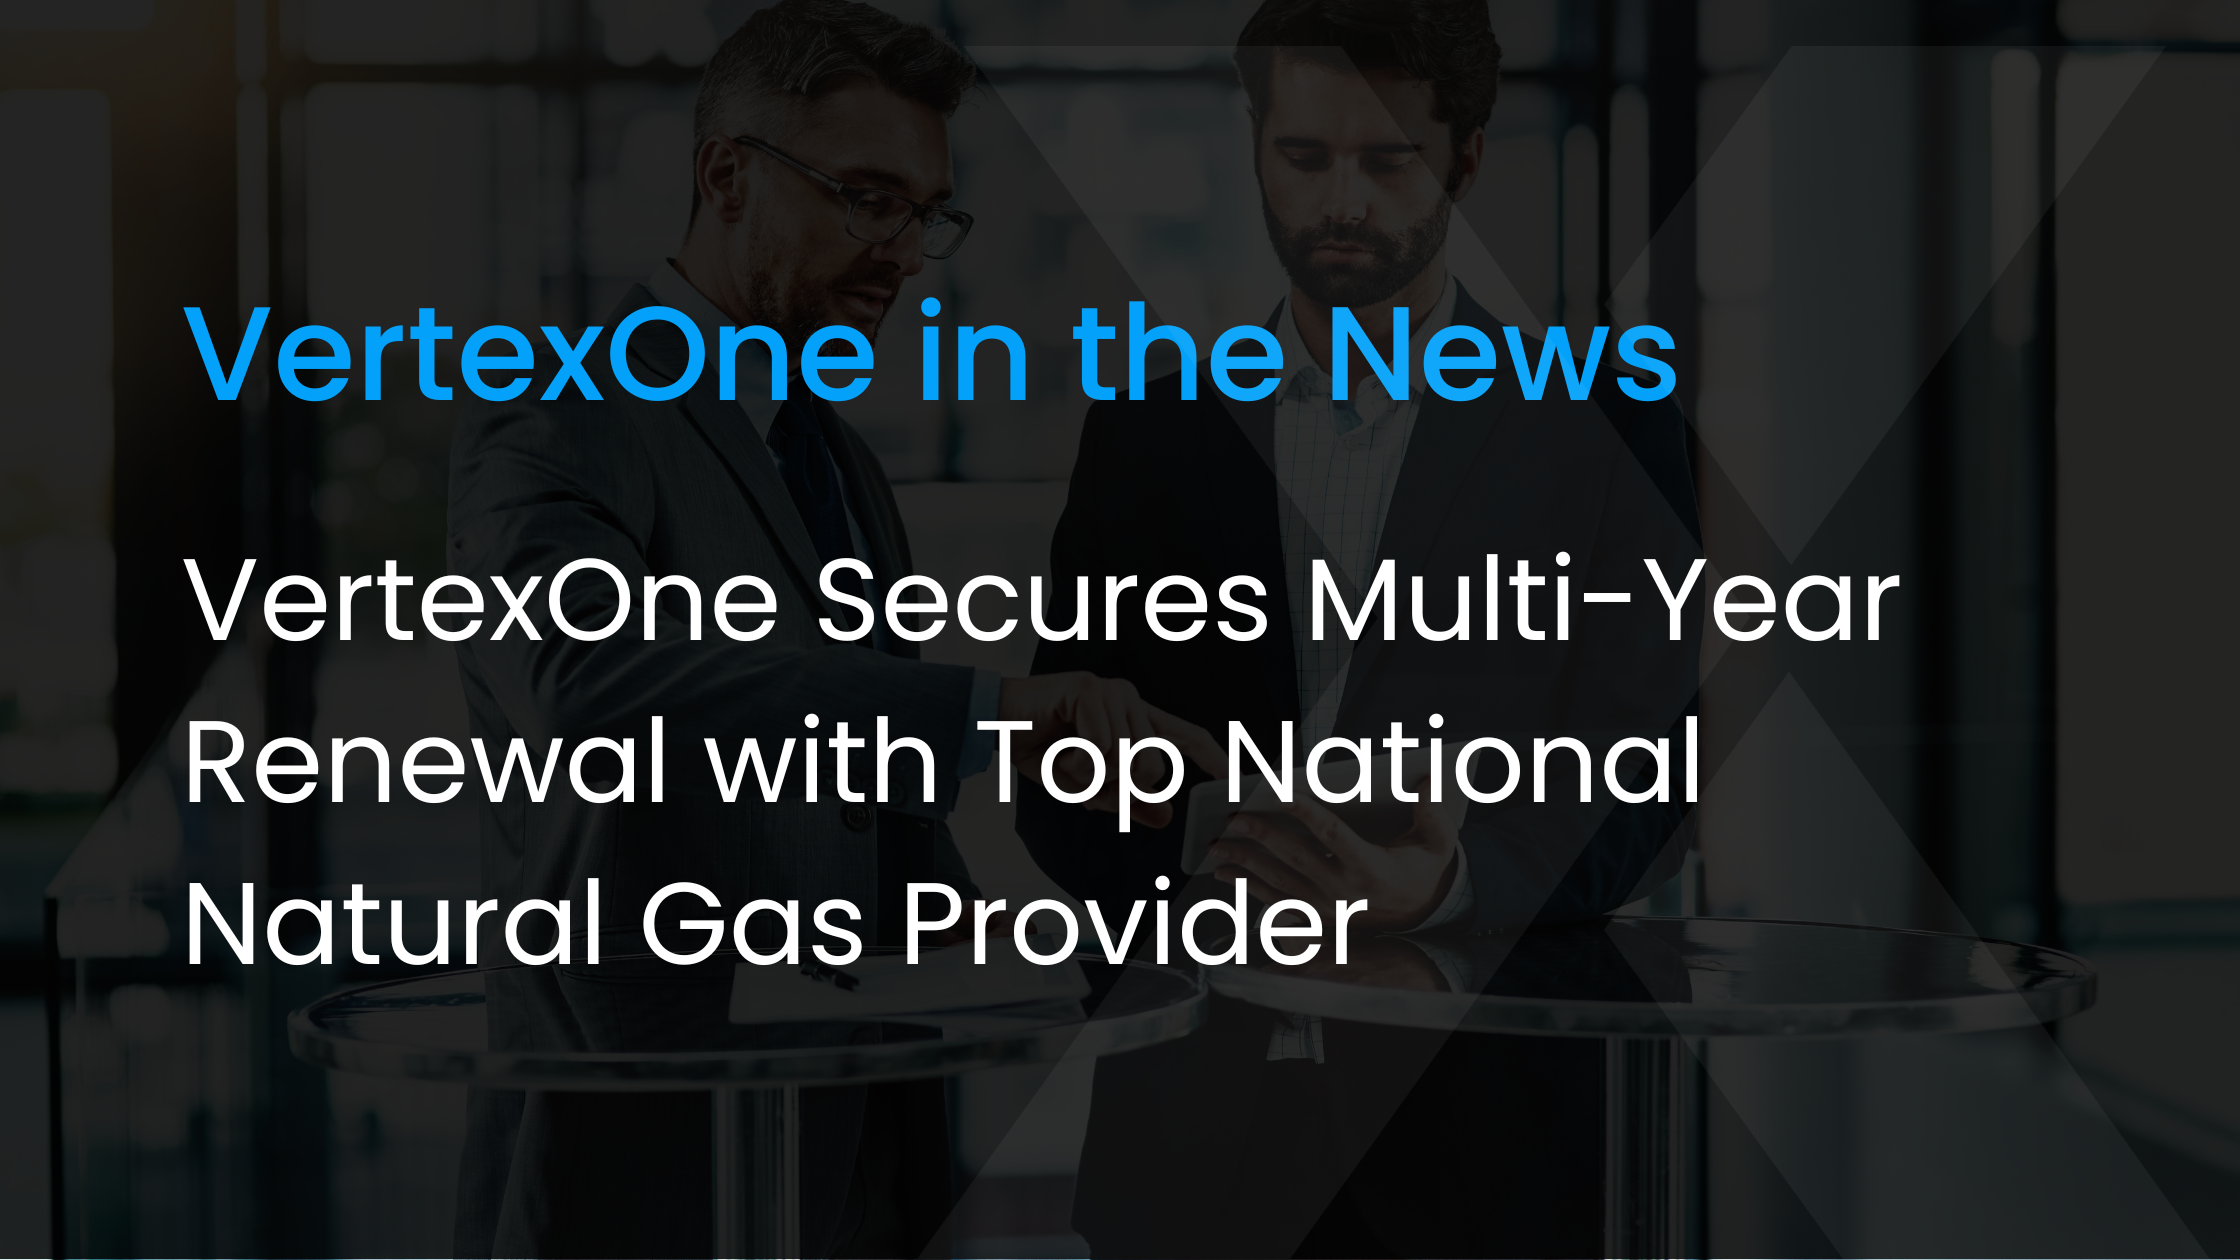 VertexOne Secures Multi-Year Renewal with Top National Natural Gas Provider